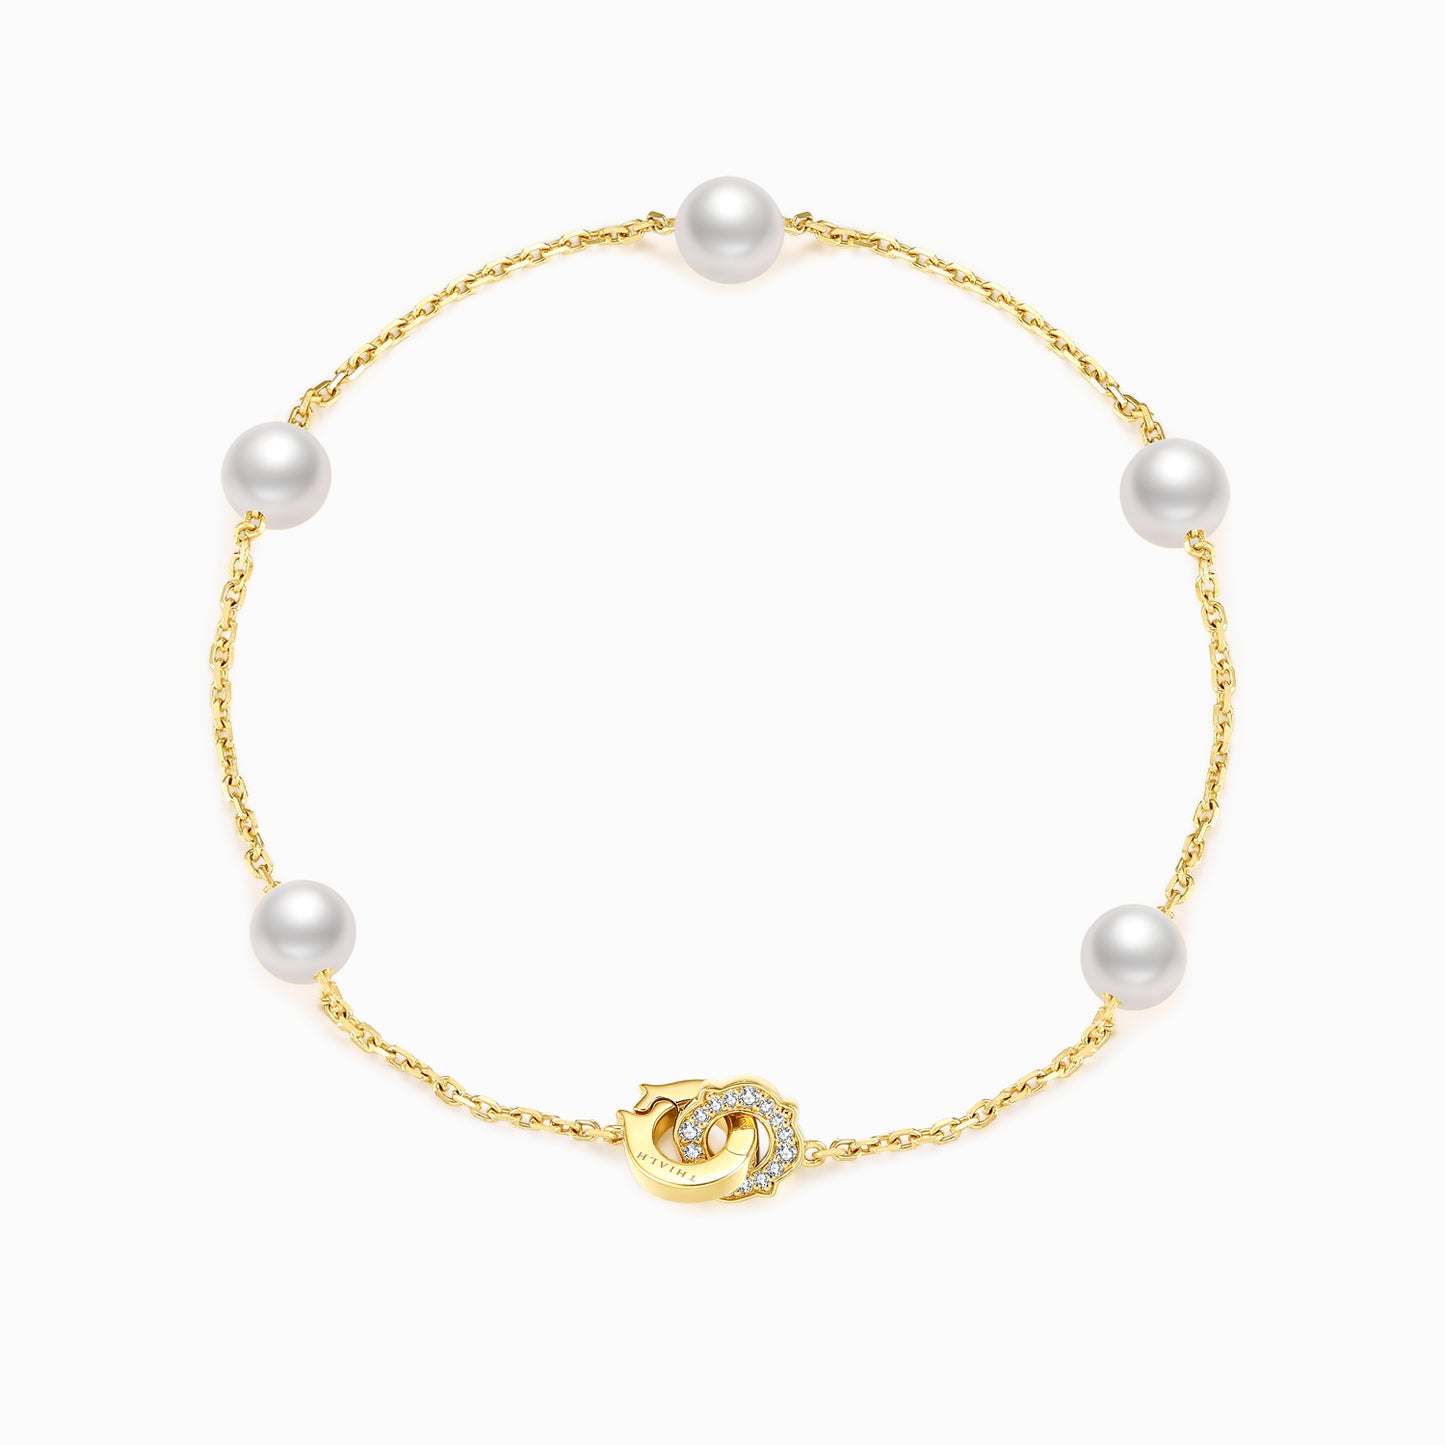 18ct White Gold Akoya Pearl Bracelet Pearl Size 8.5 x 9mm - Gemstones from  Ray & Scott Limited UK